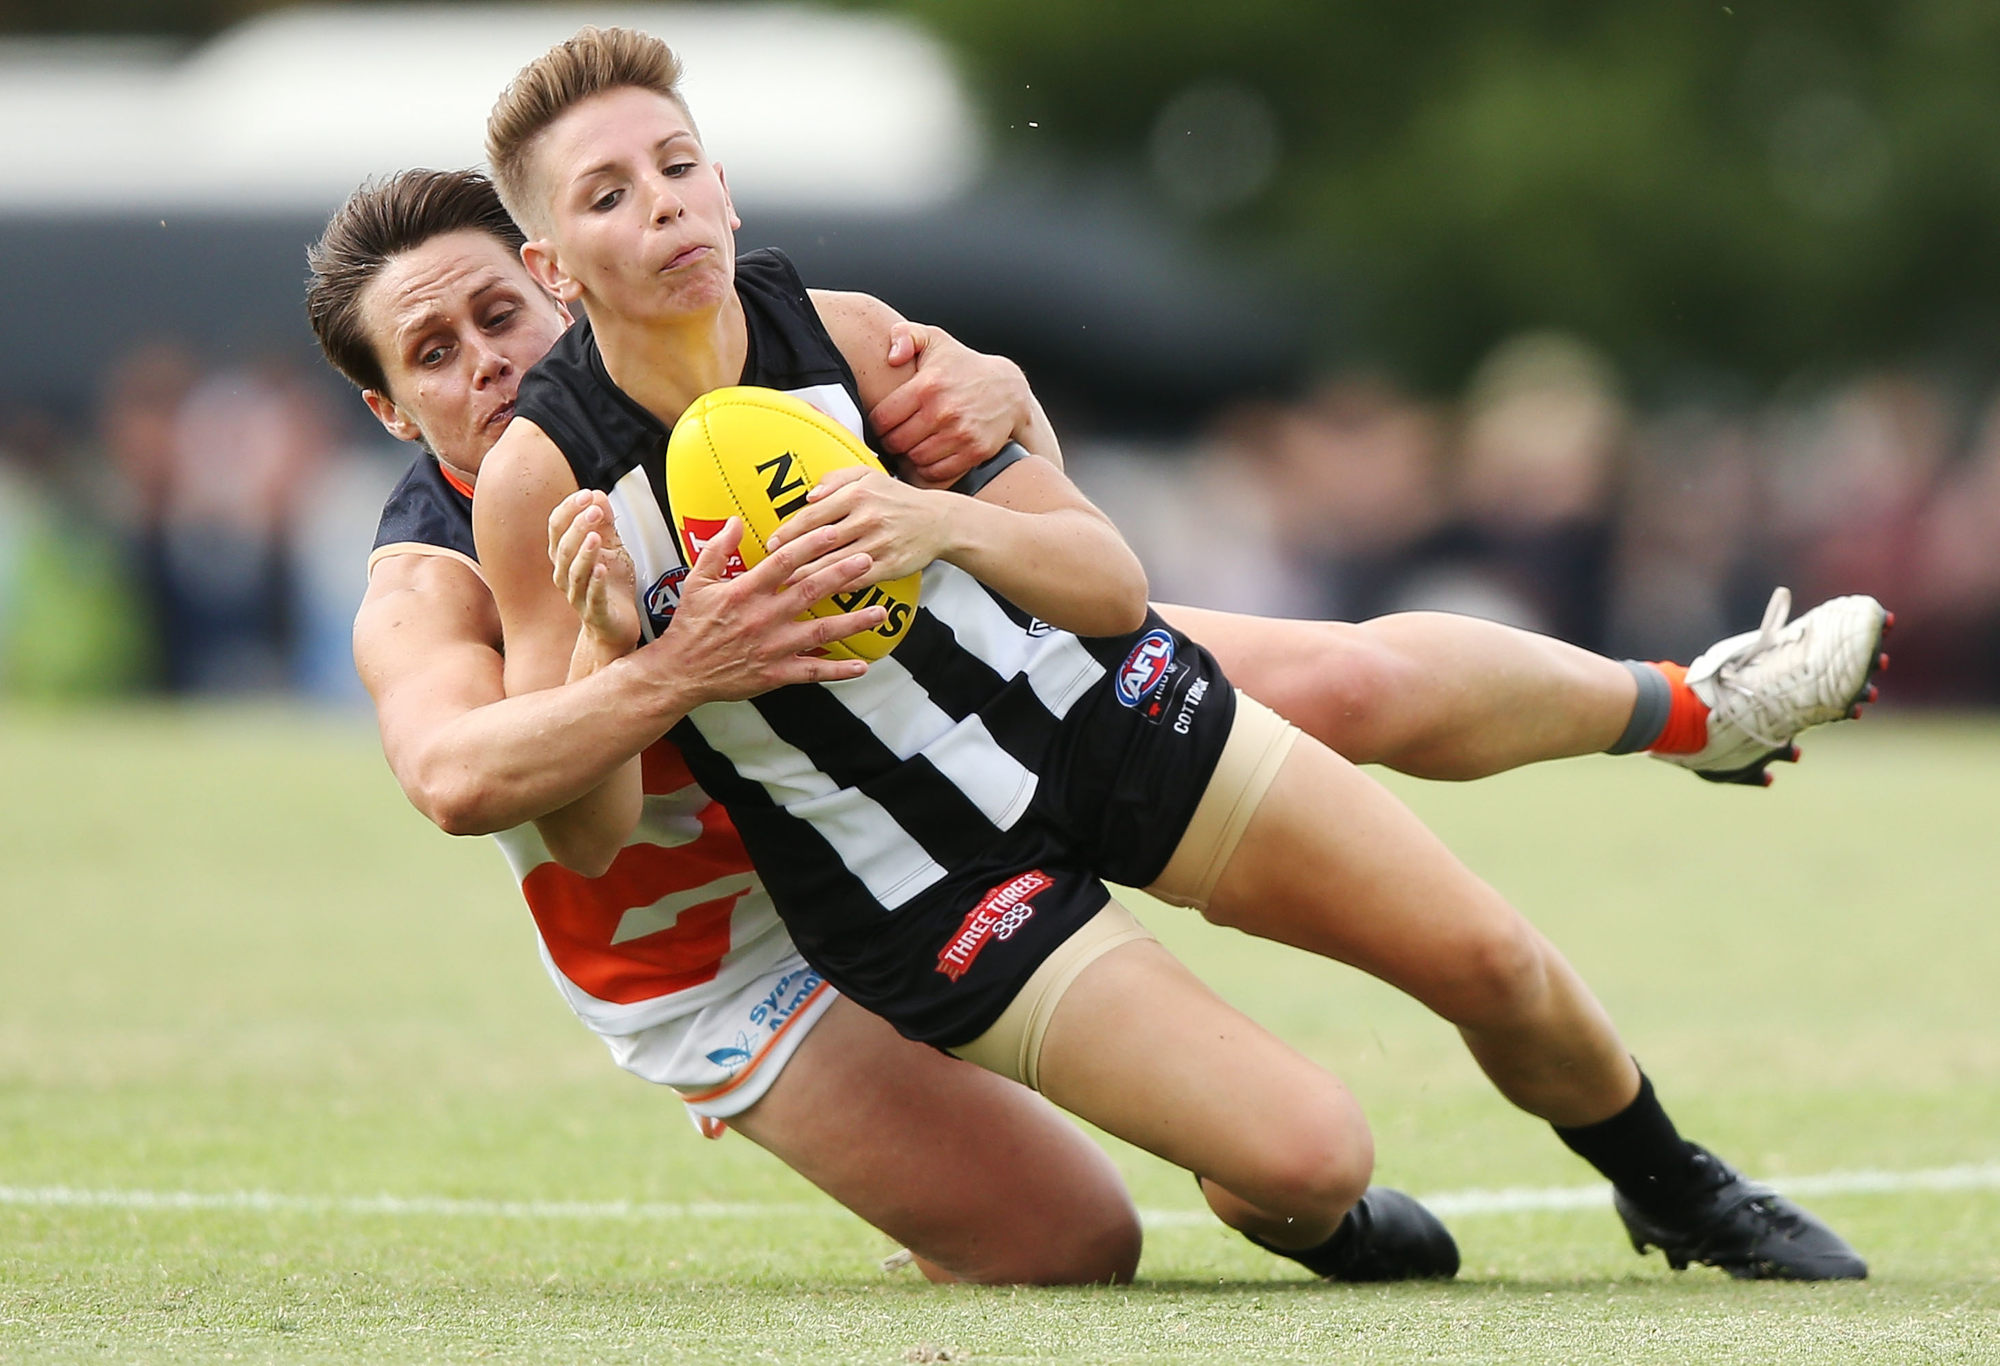 Collingwood's Emma Grant is tackled during a 2018 AFLW match.